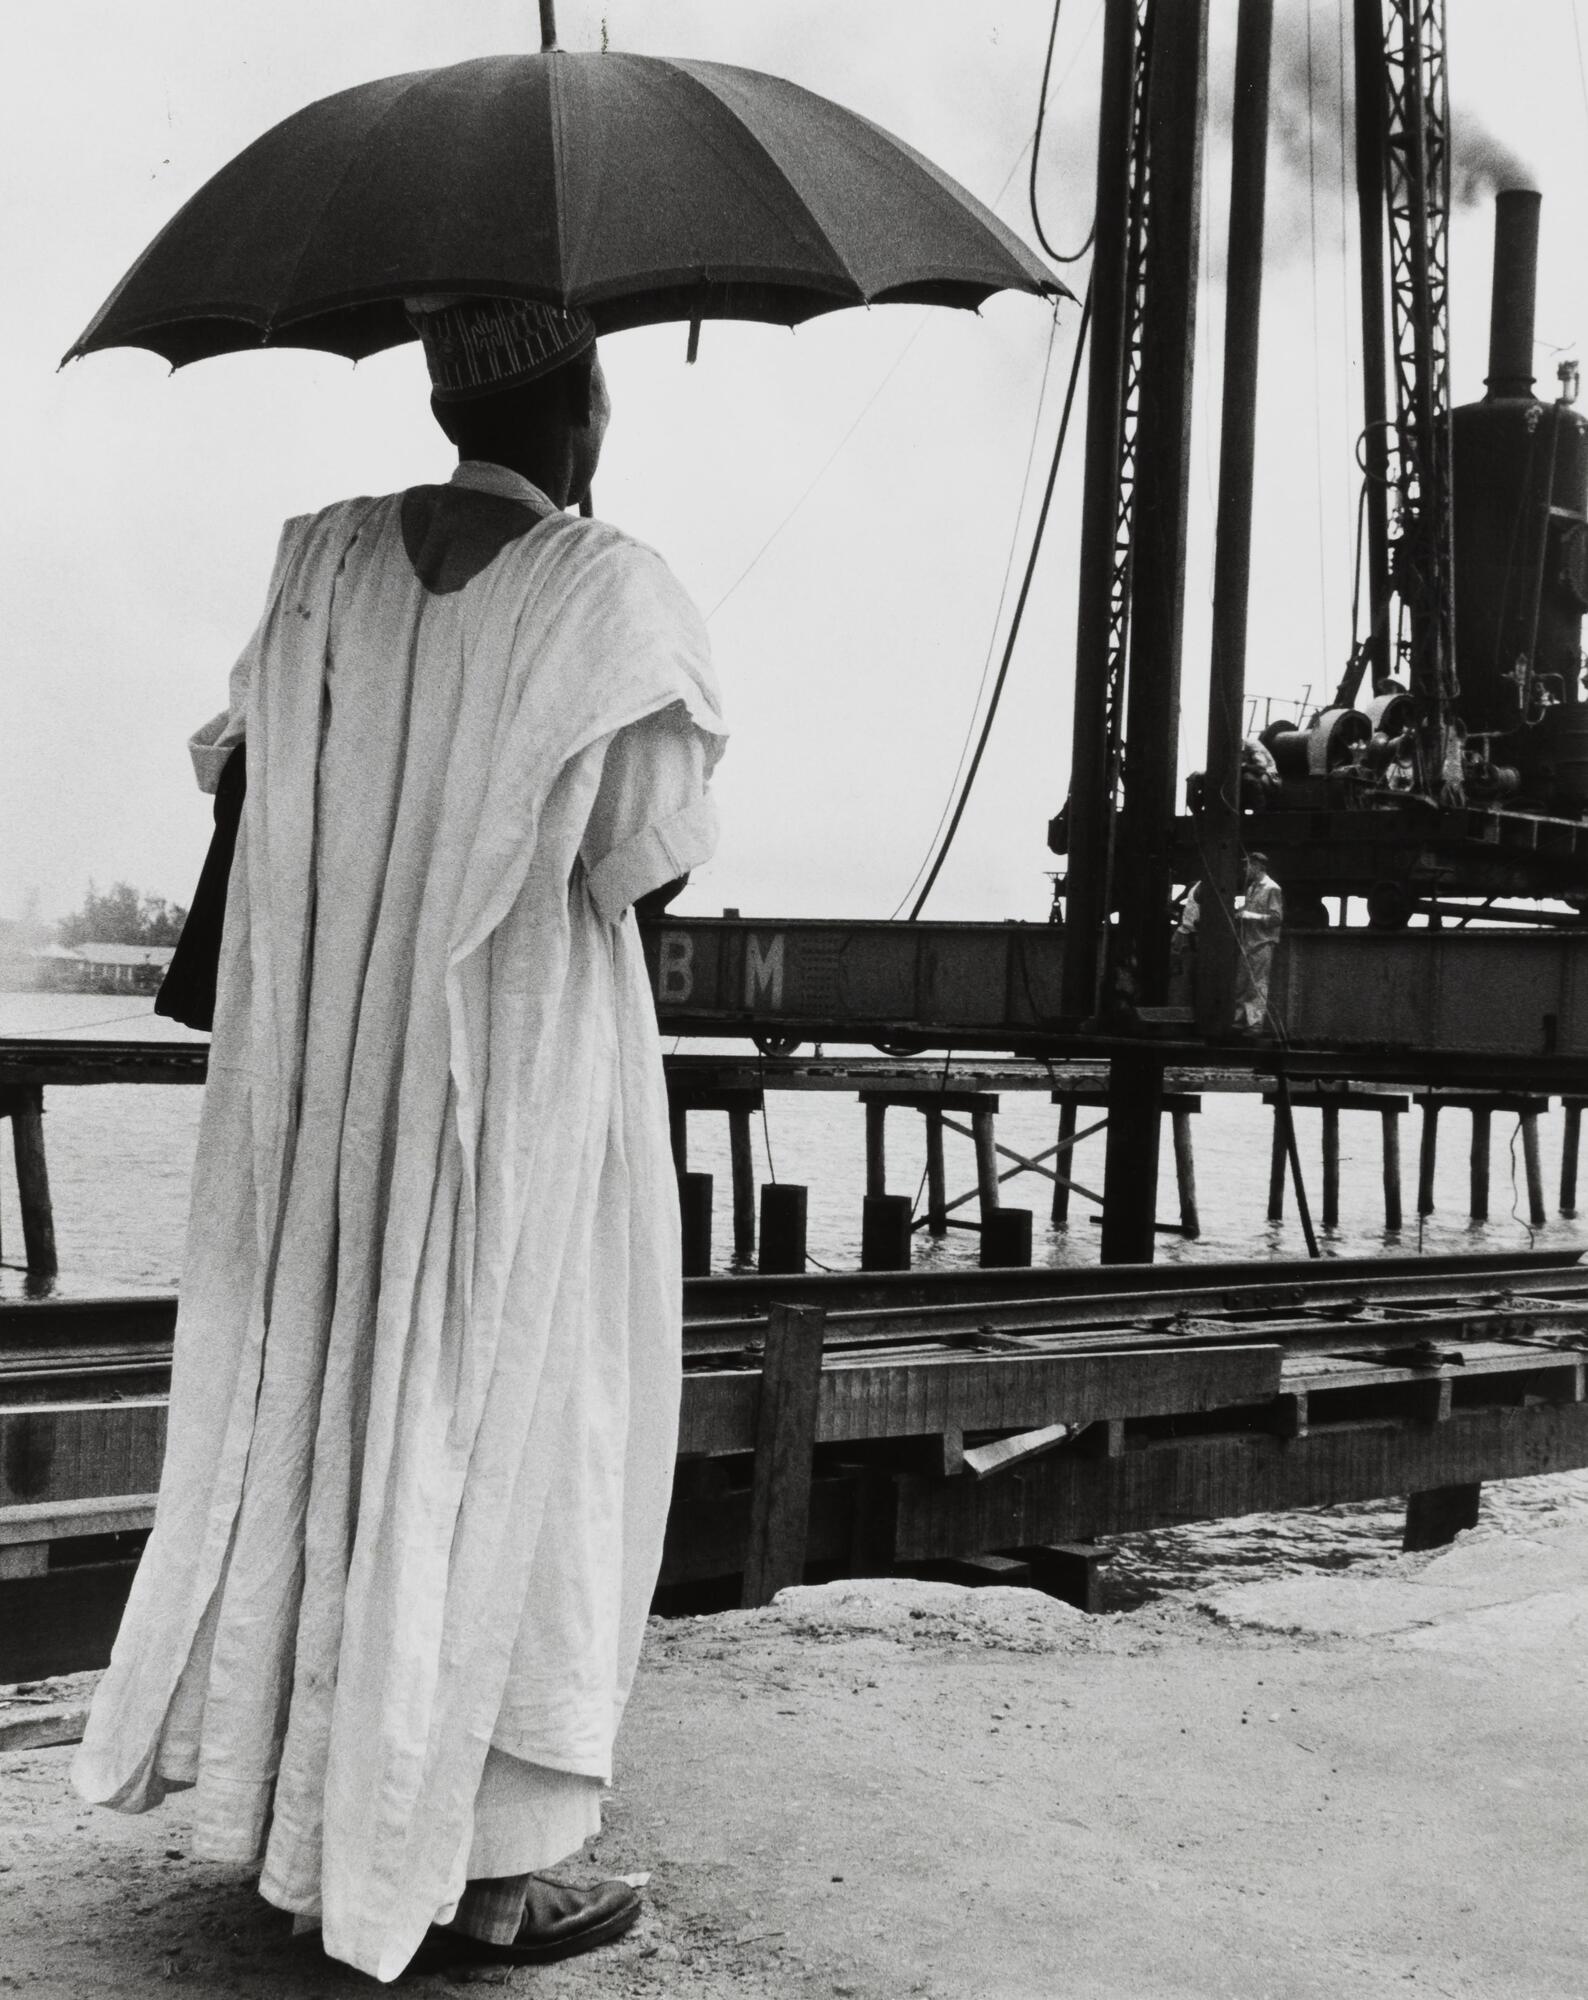 A man wearing long, light-colored robes faces away from the camera watching machinery at the edge of a body of water. He holds a dark umbrella.